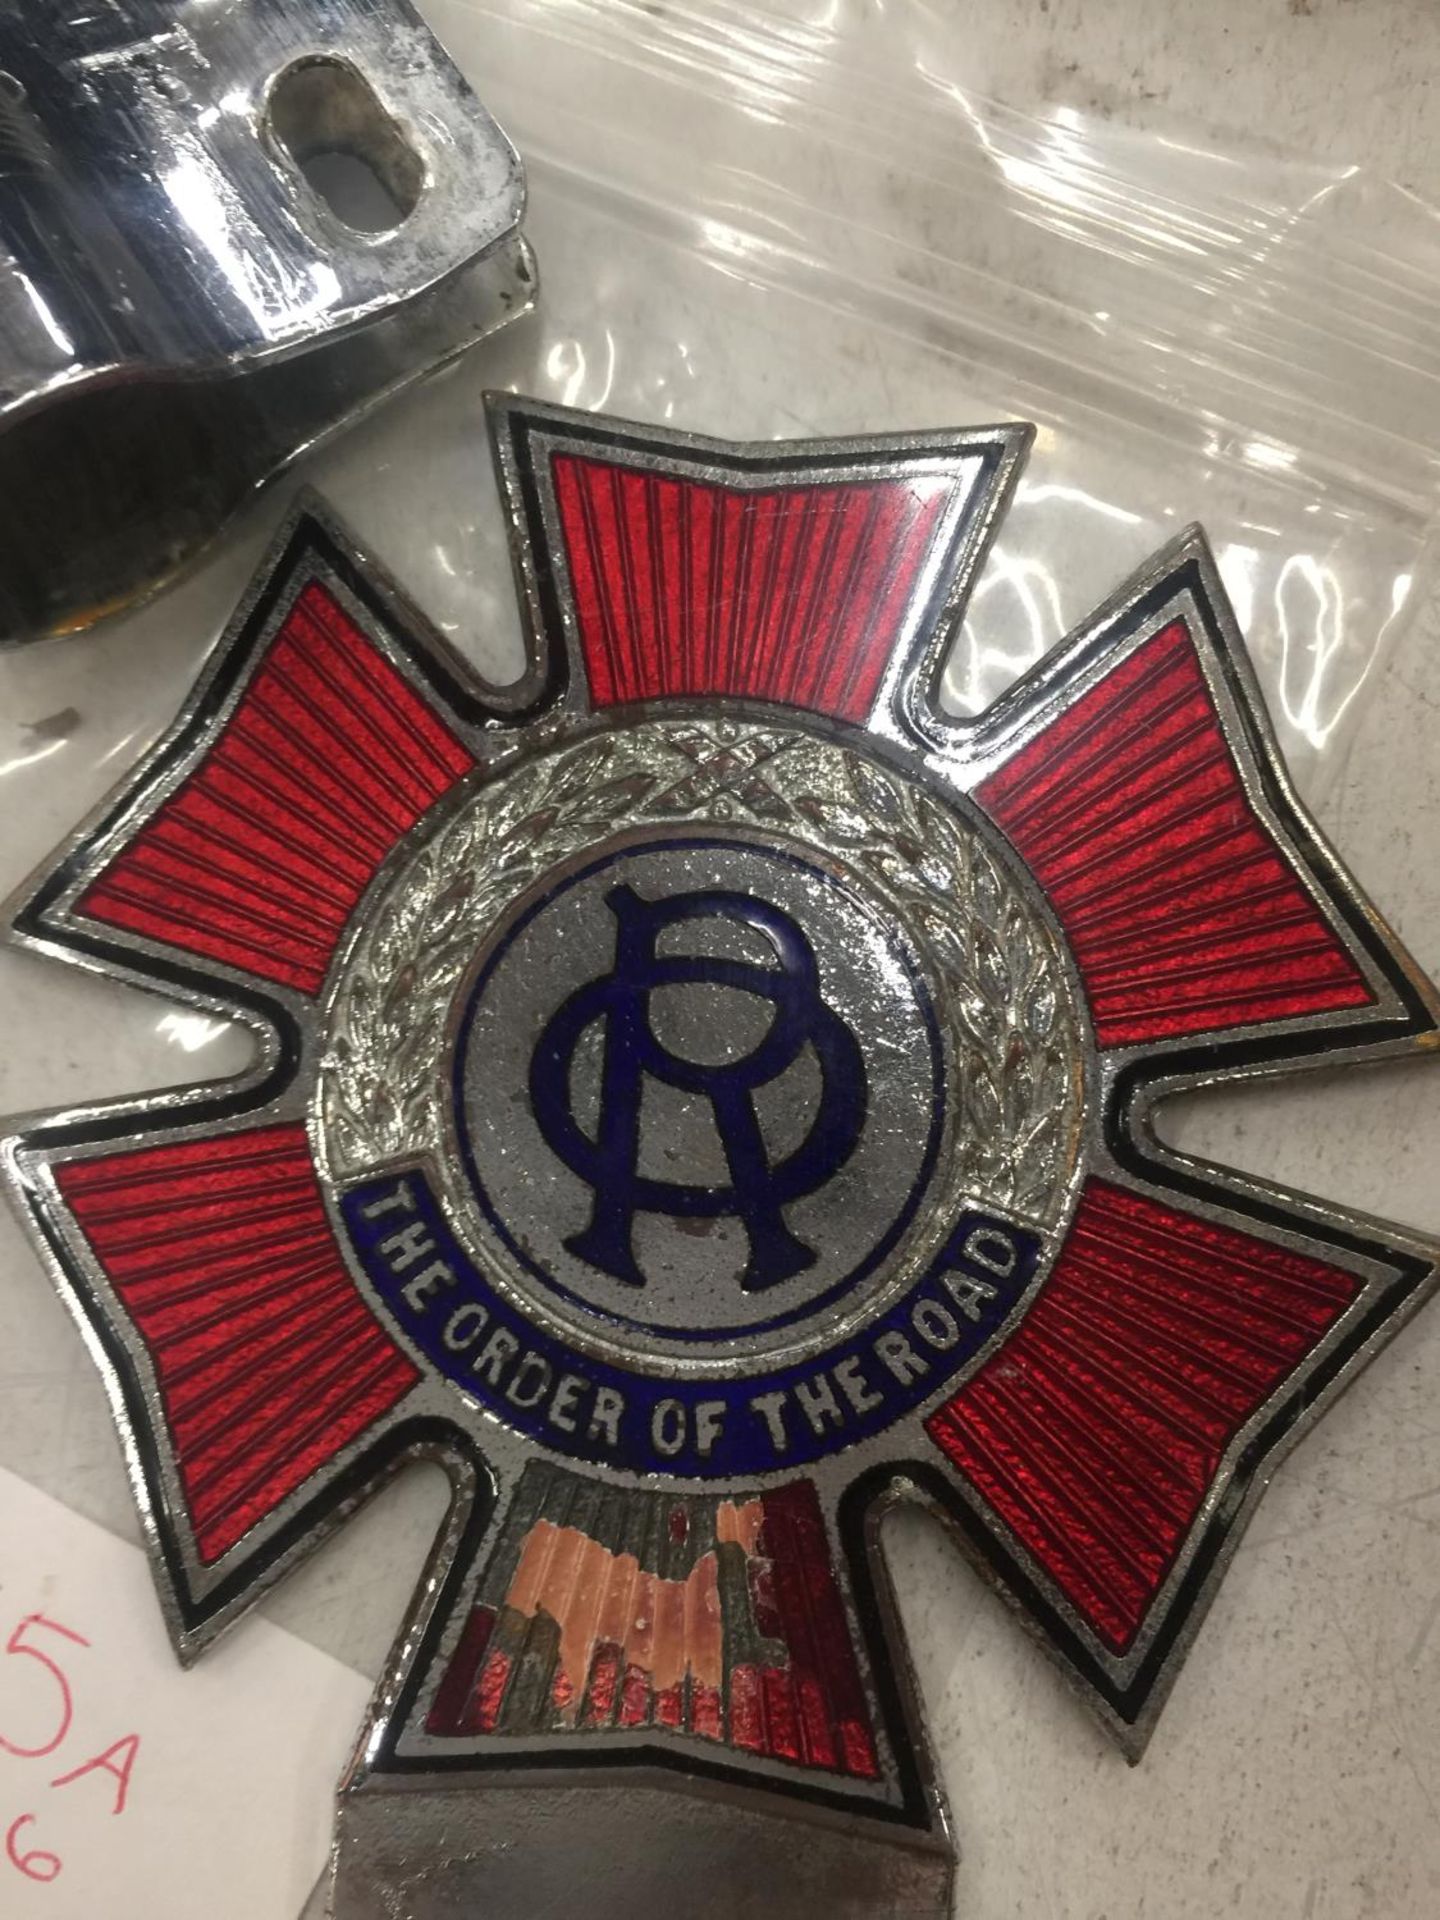 A VINTAGE ENAMEL ORDER OF THE ROAD BUMPER BADGE WITH CLIP - Image 2 of 2